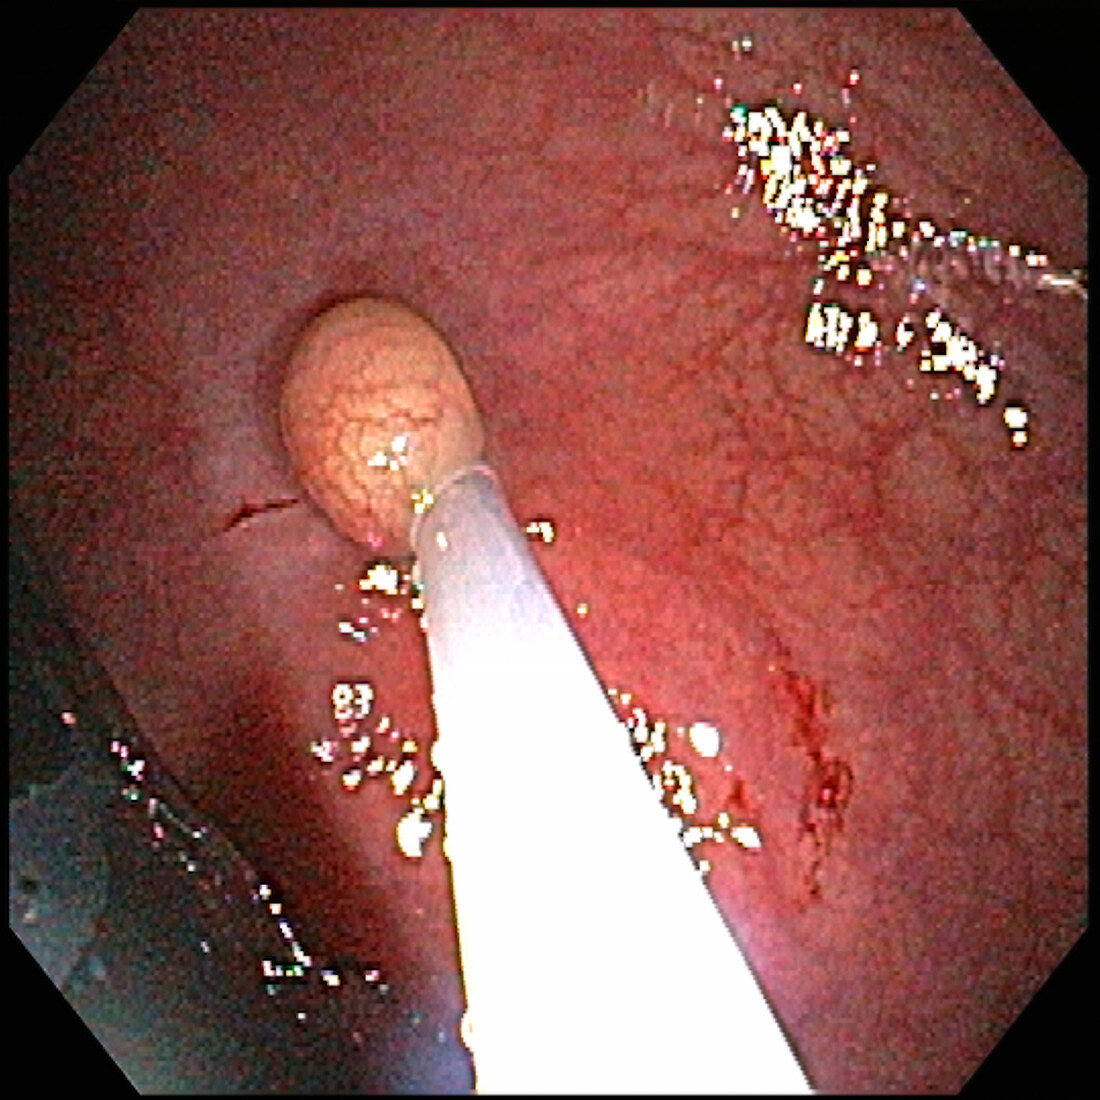 Removal of Rectal Carcinoid